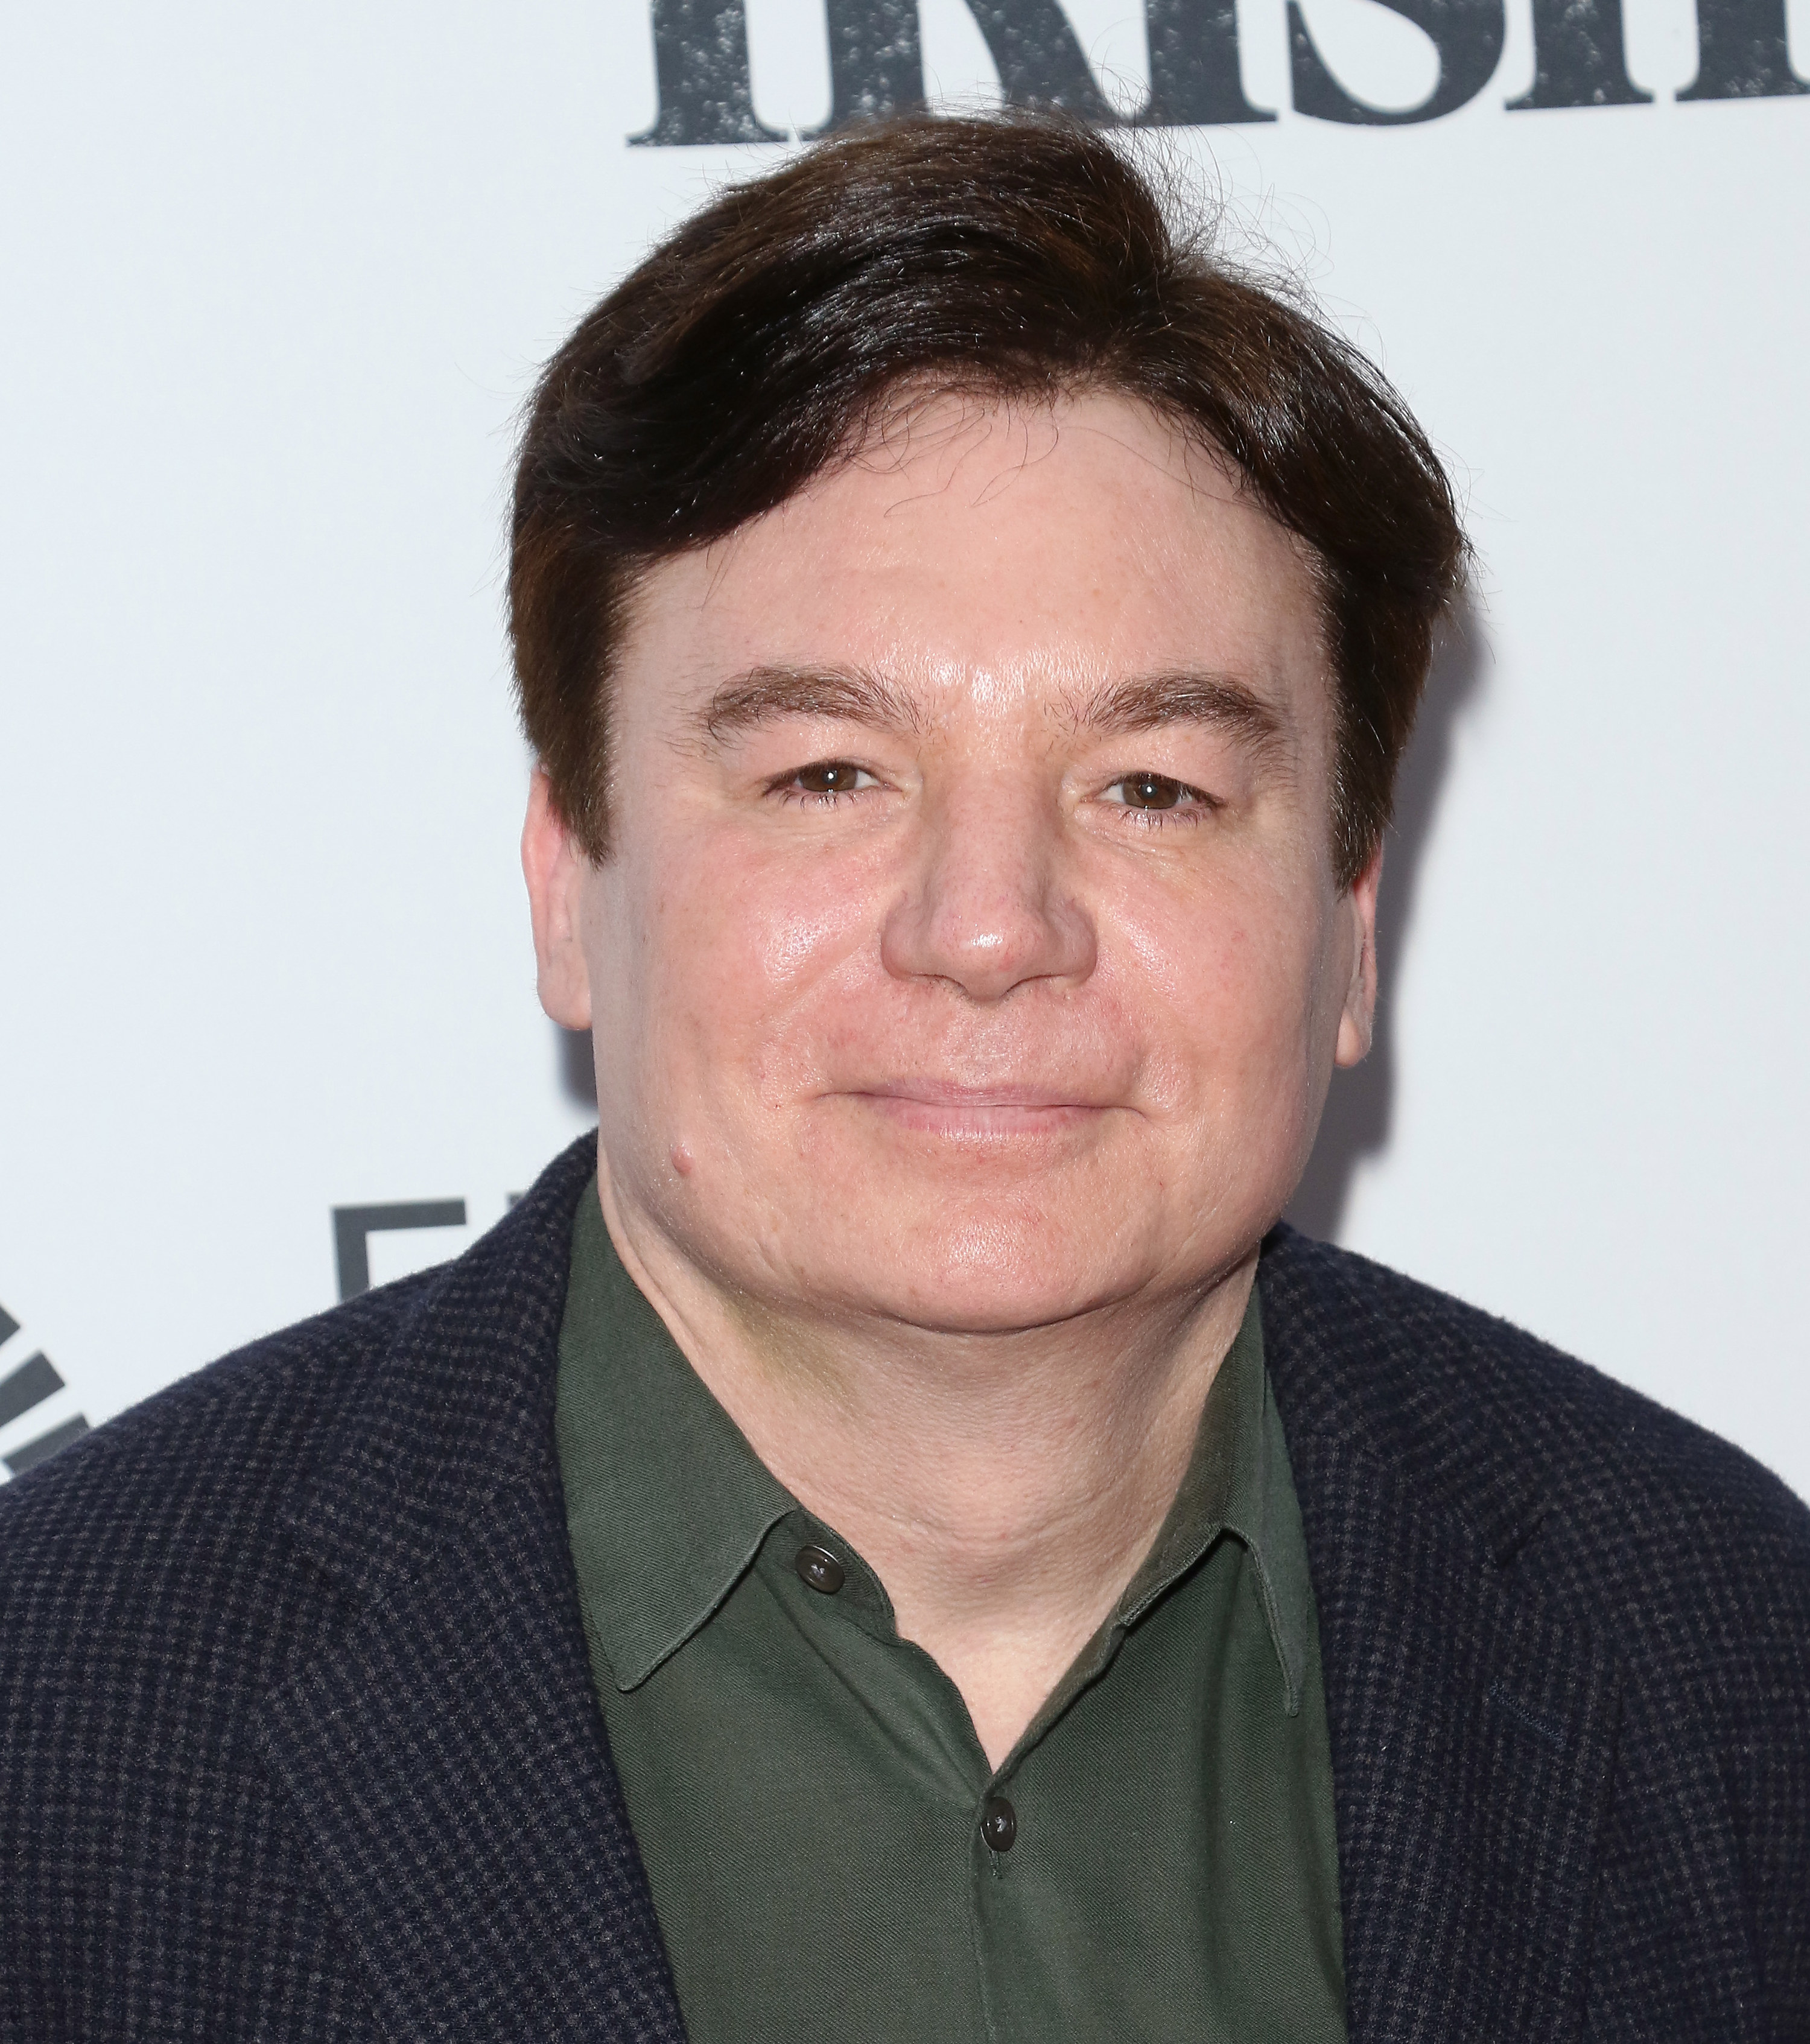 Mike Myers posing at premiere